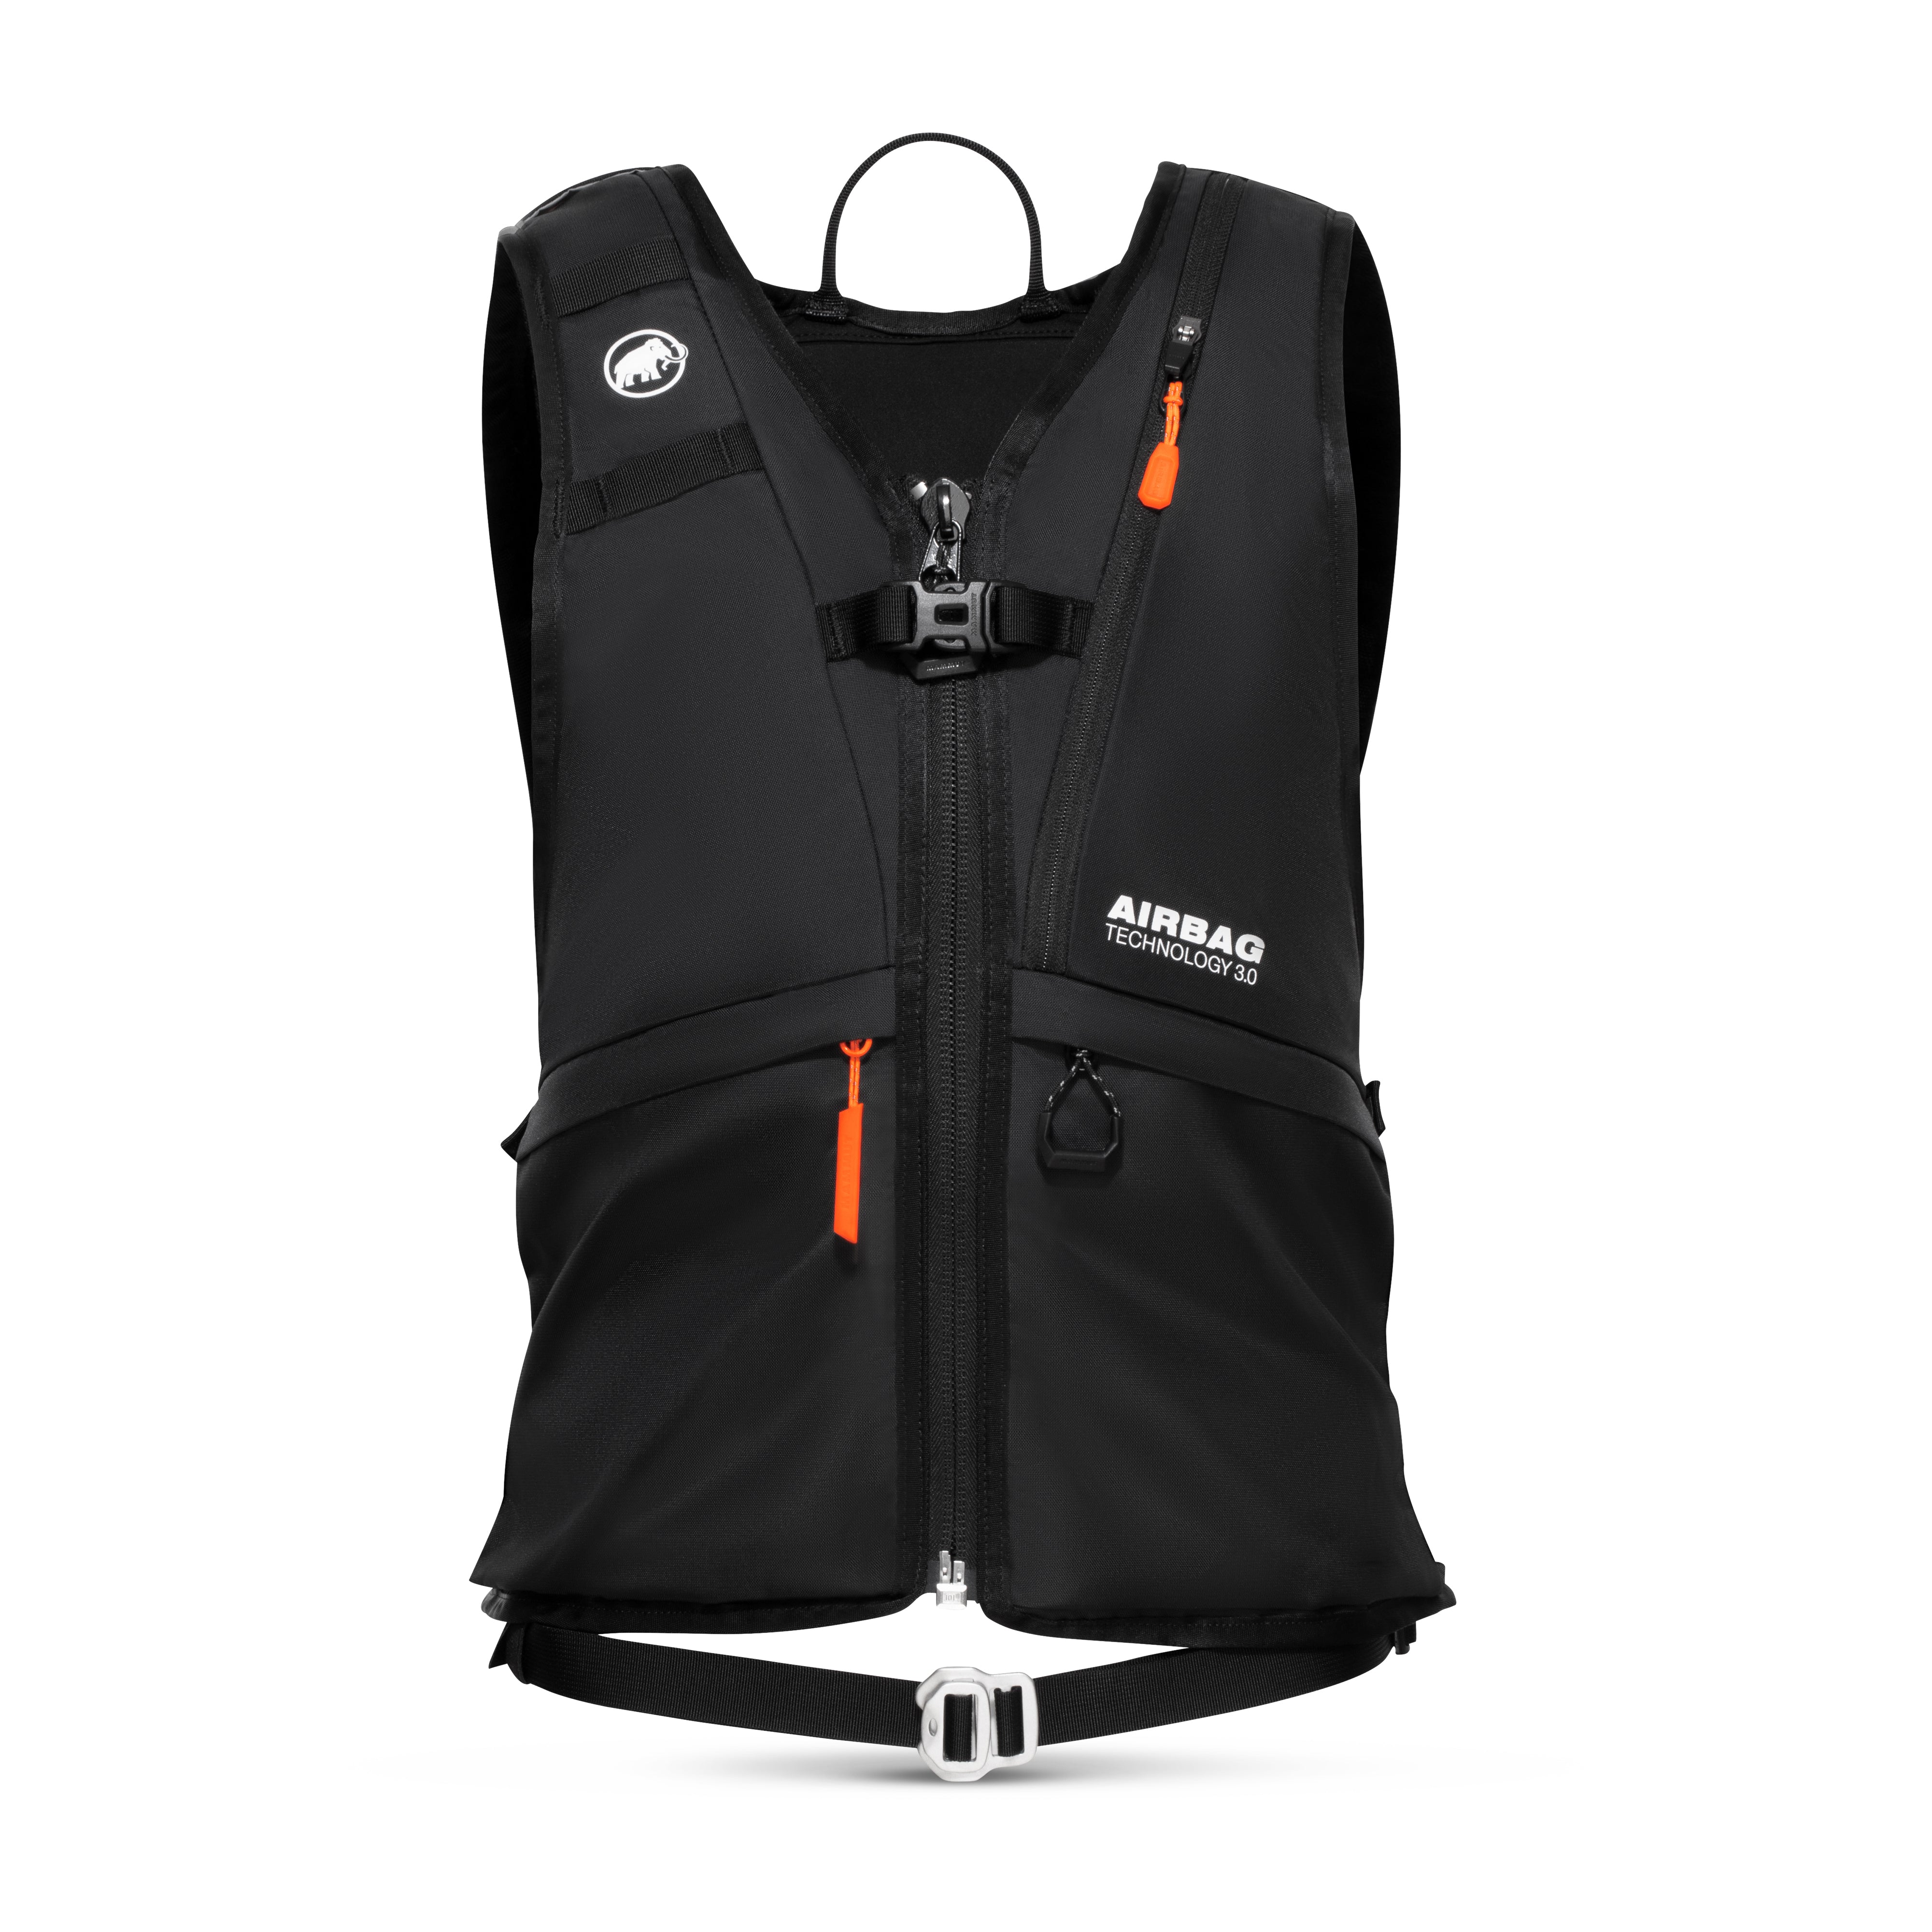 Free Vest 15 Removable Airbag 3.0 (M Xl)